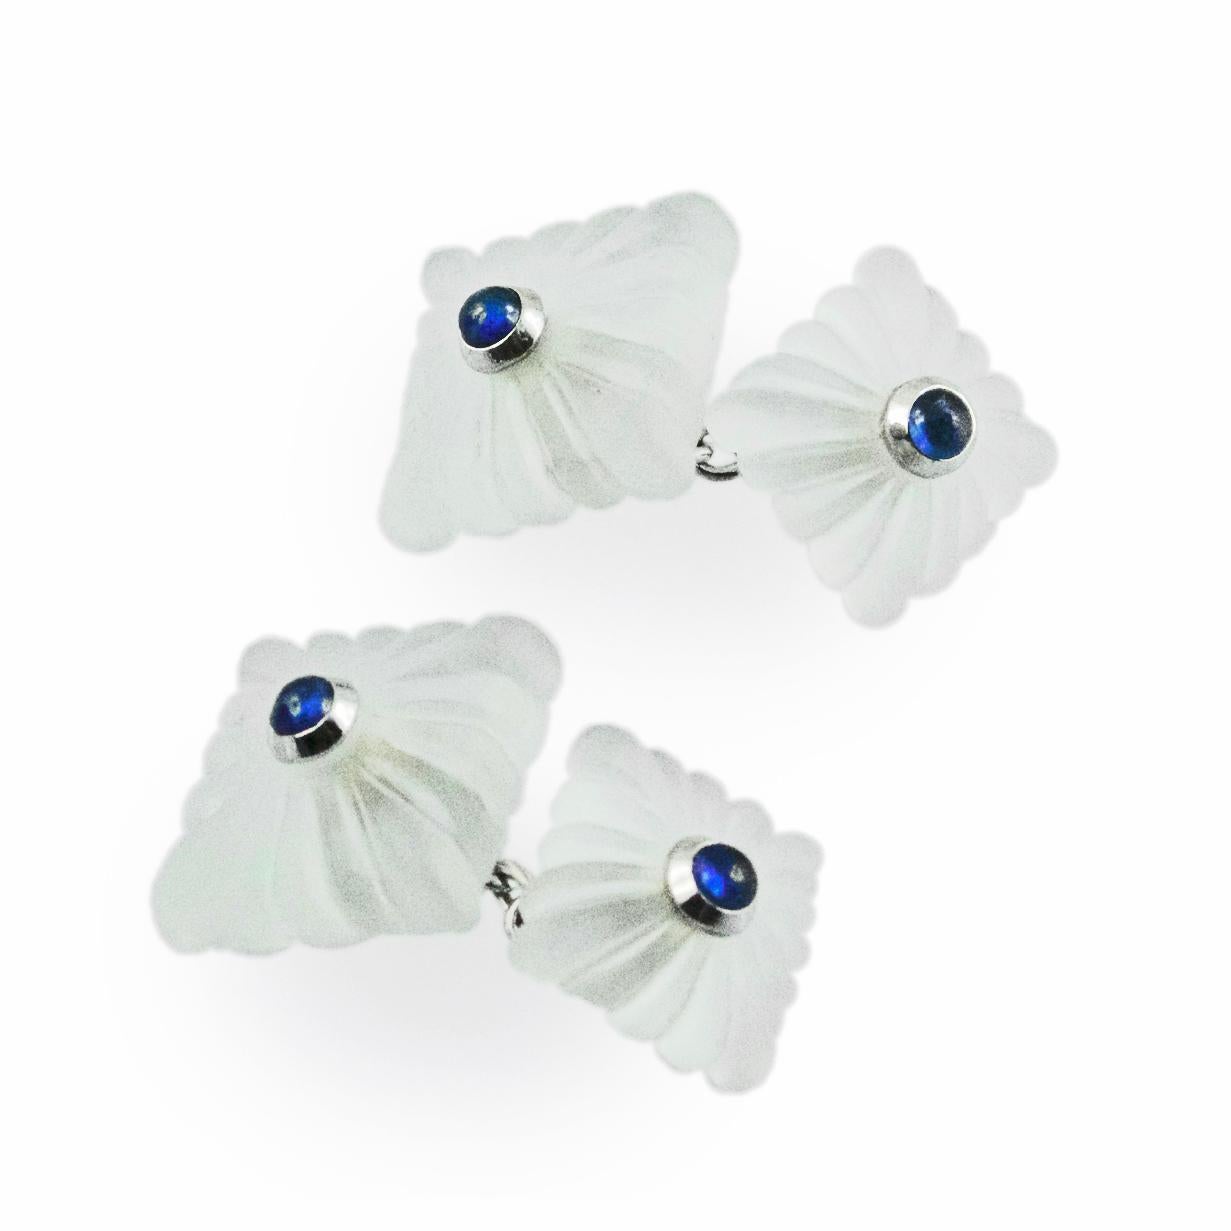 This timeless pair of cufflinks is entirely made of frosted rock crystal and features a squared front face with the traditional “fesonato” texture. The toggle is identical but smaller. Both elements are adorned in the center with a cabochon